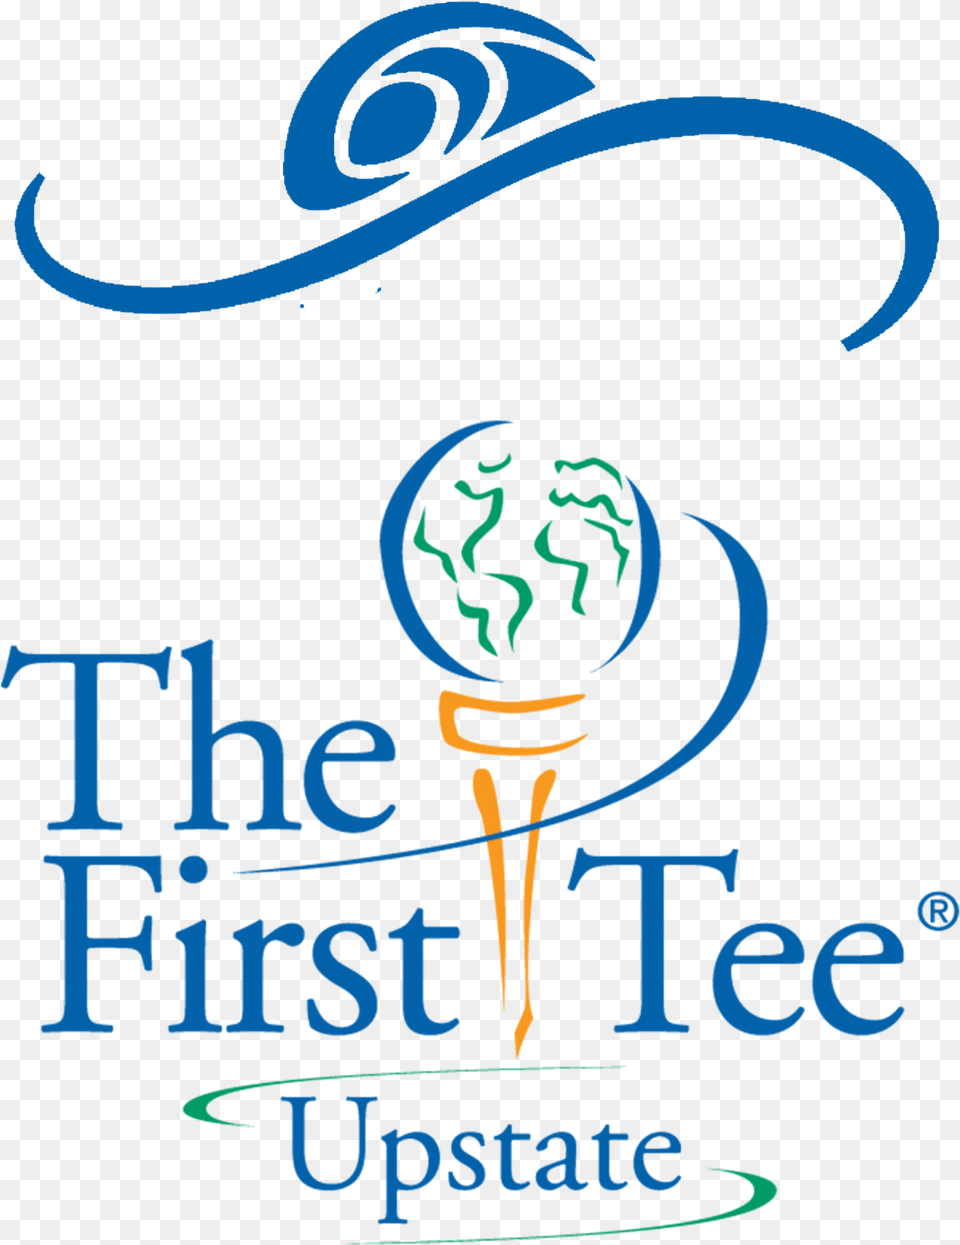 First Tee Upstate, Light, Clothing, Hat, Advertisement Png Image